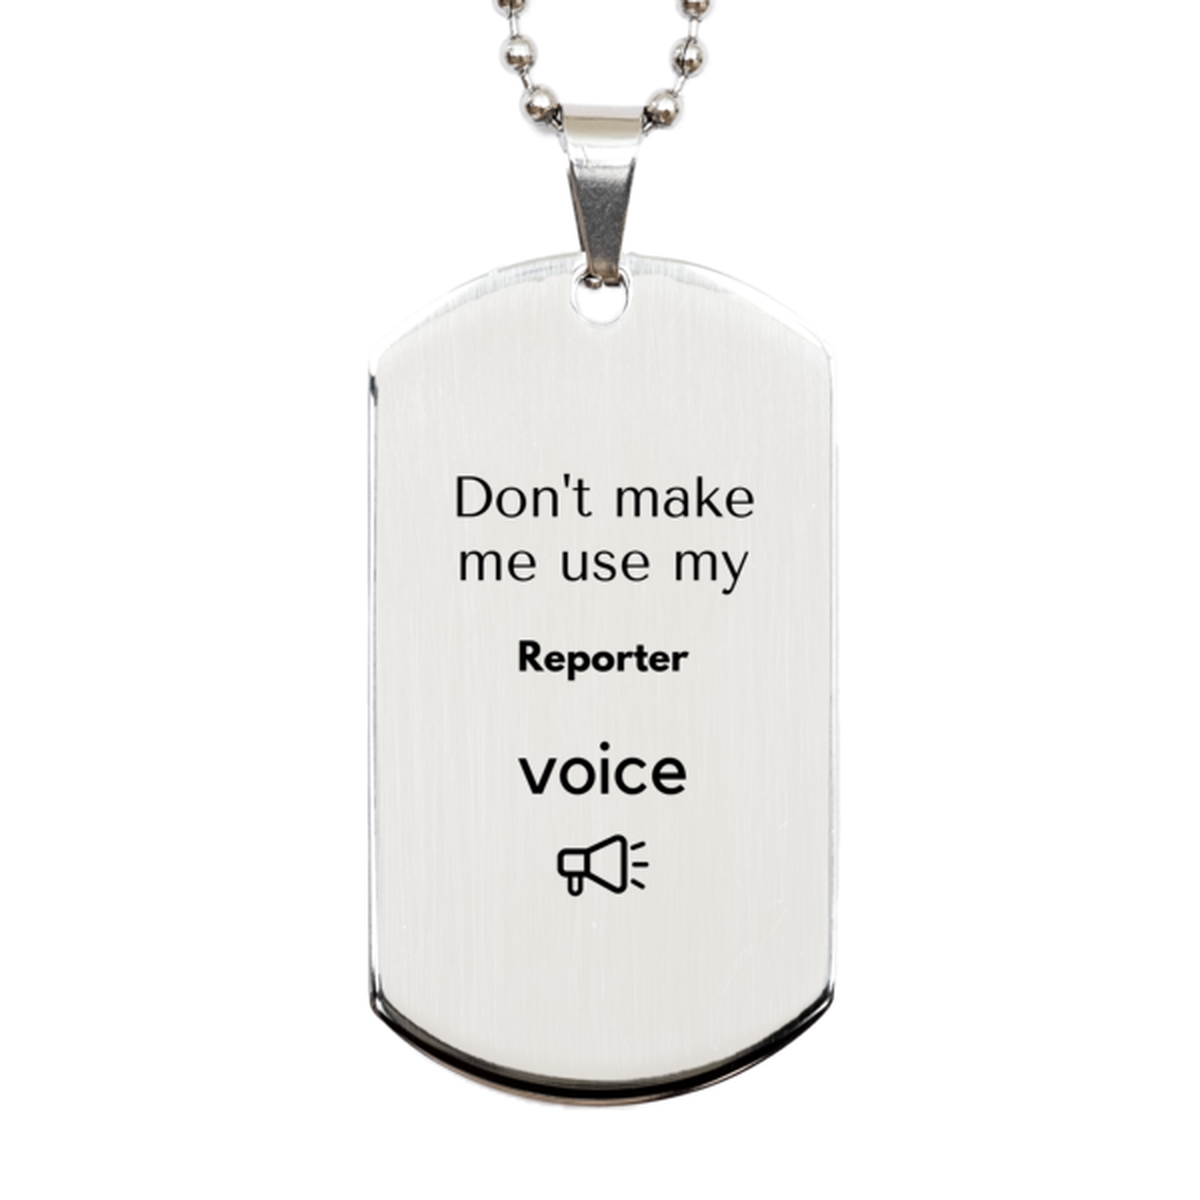 Don't make me use my Reporter voice, Sarcasm Reporter Gifts, Christmas Reporter Silver Dog Tag Birthday Unique Gifts For Reporter Coworkers, Men, Women, Colleague, Friends